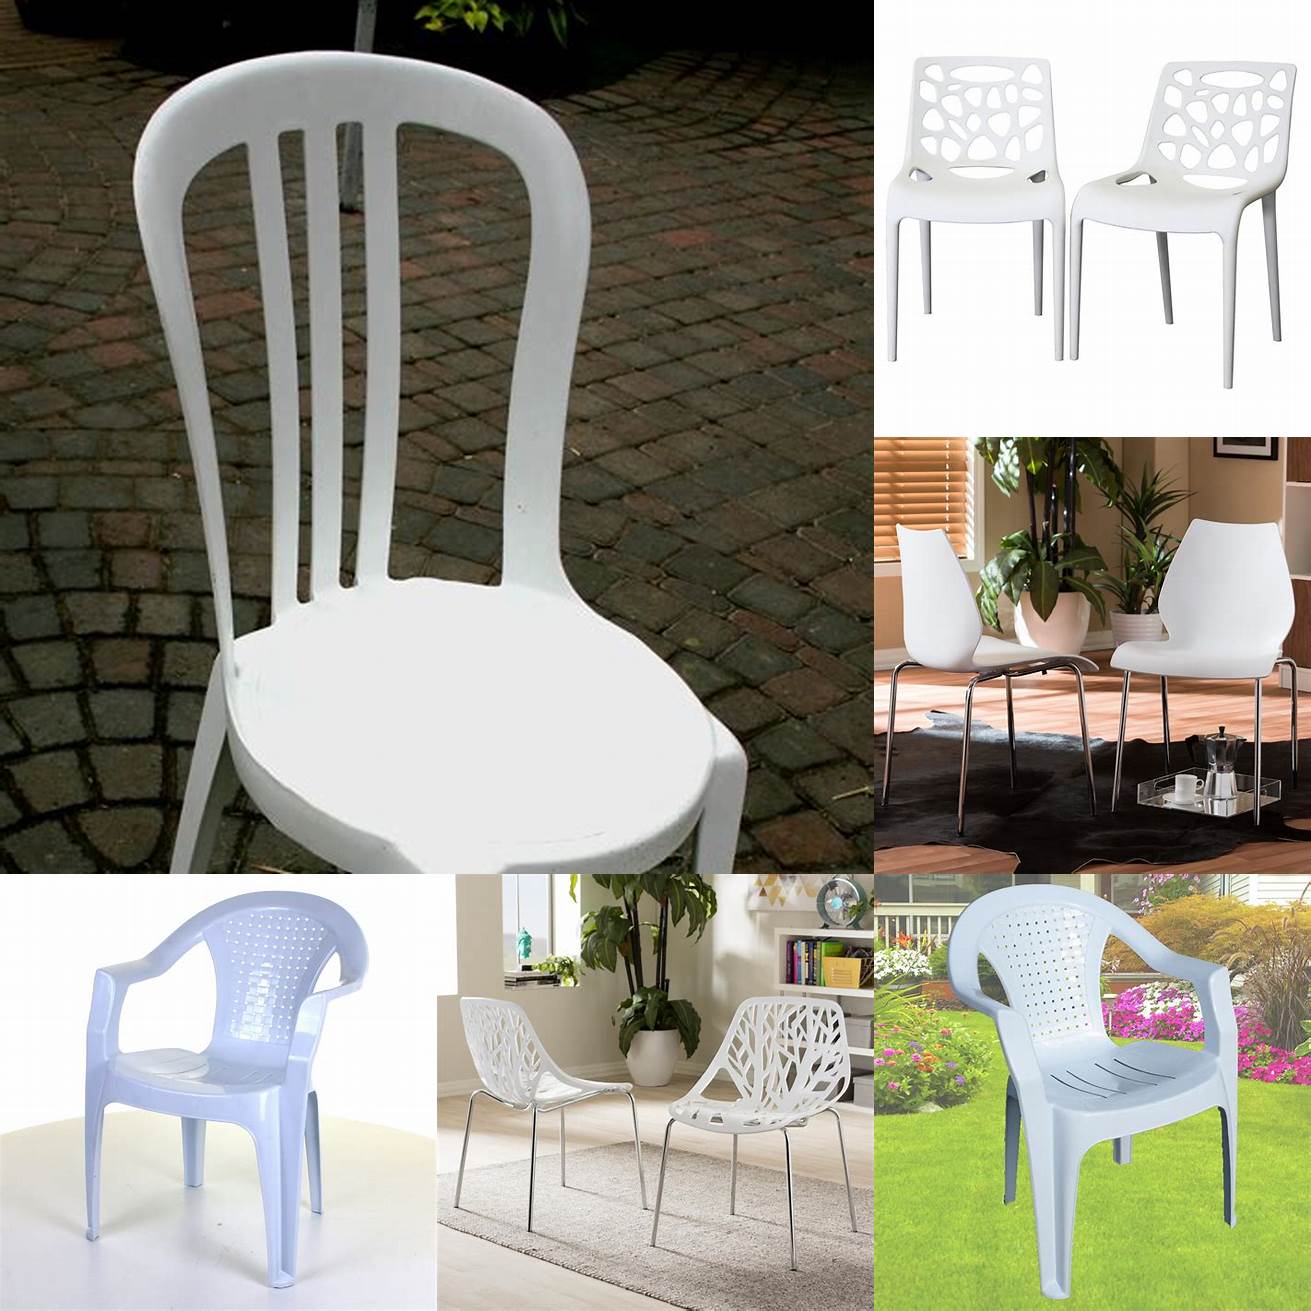 A white plastic chair with a modern design